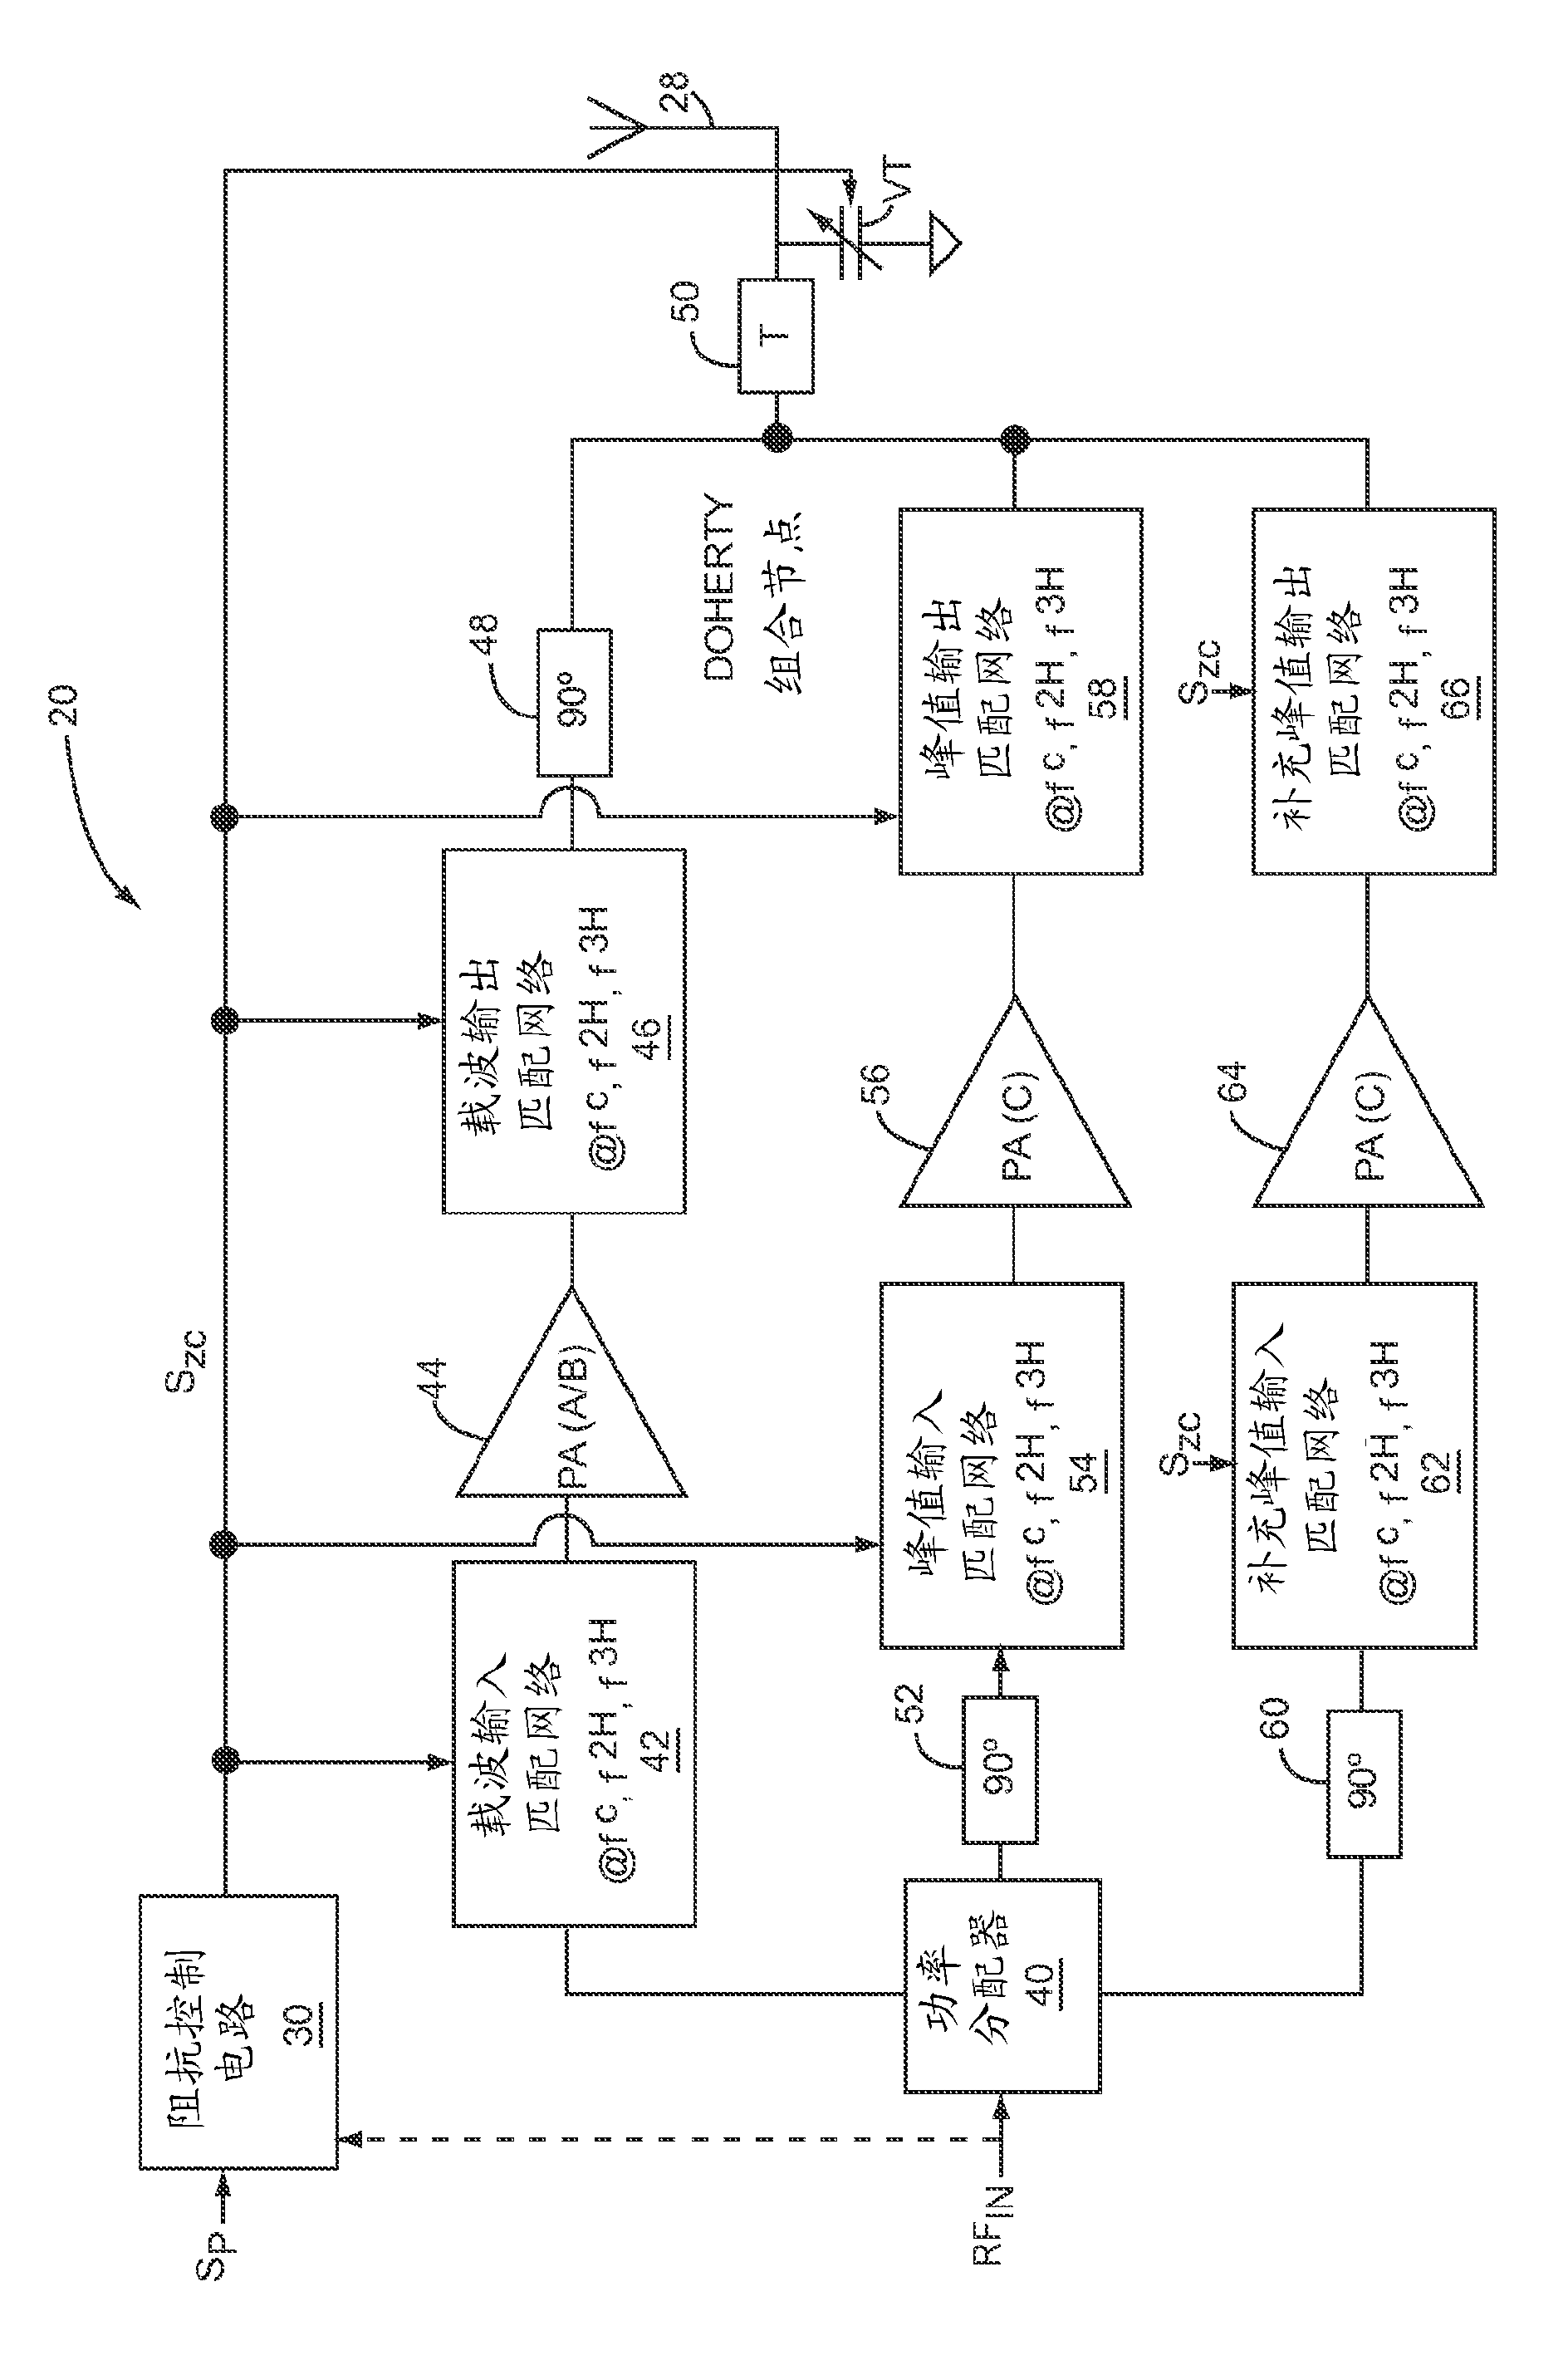 Matching network for transmission circuitry